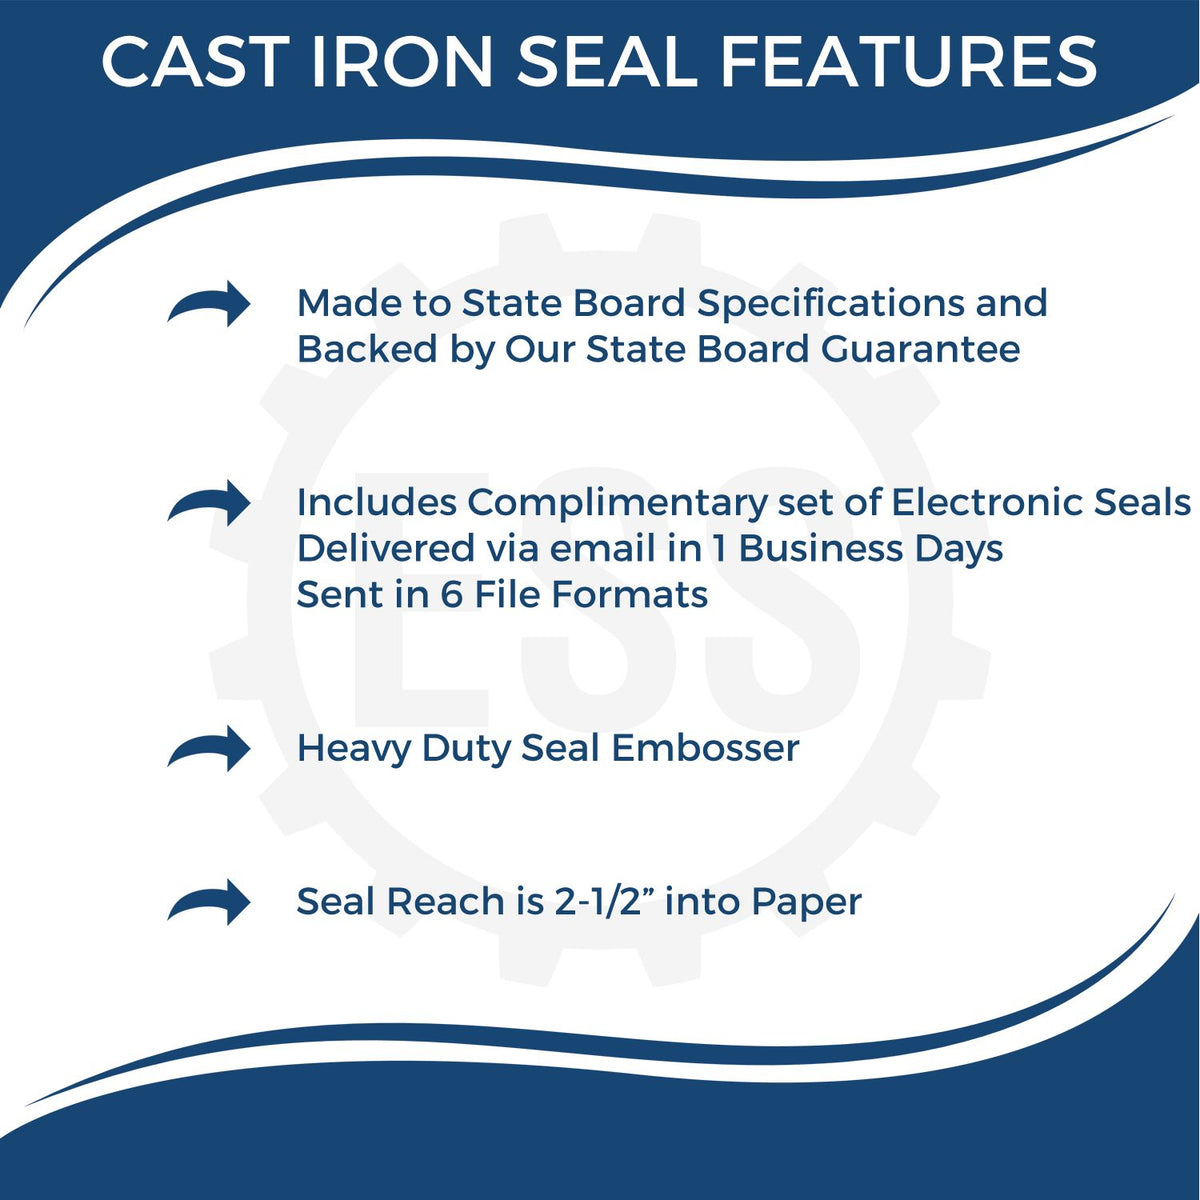 A picture of an infographic highlighting the selling points for the Heavy Duty Cast Iron Connecticut Geologist Seal Embosser